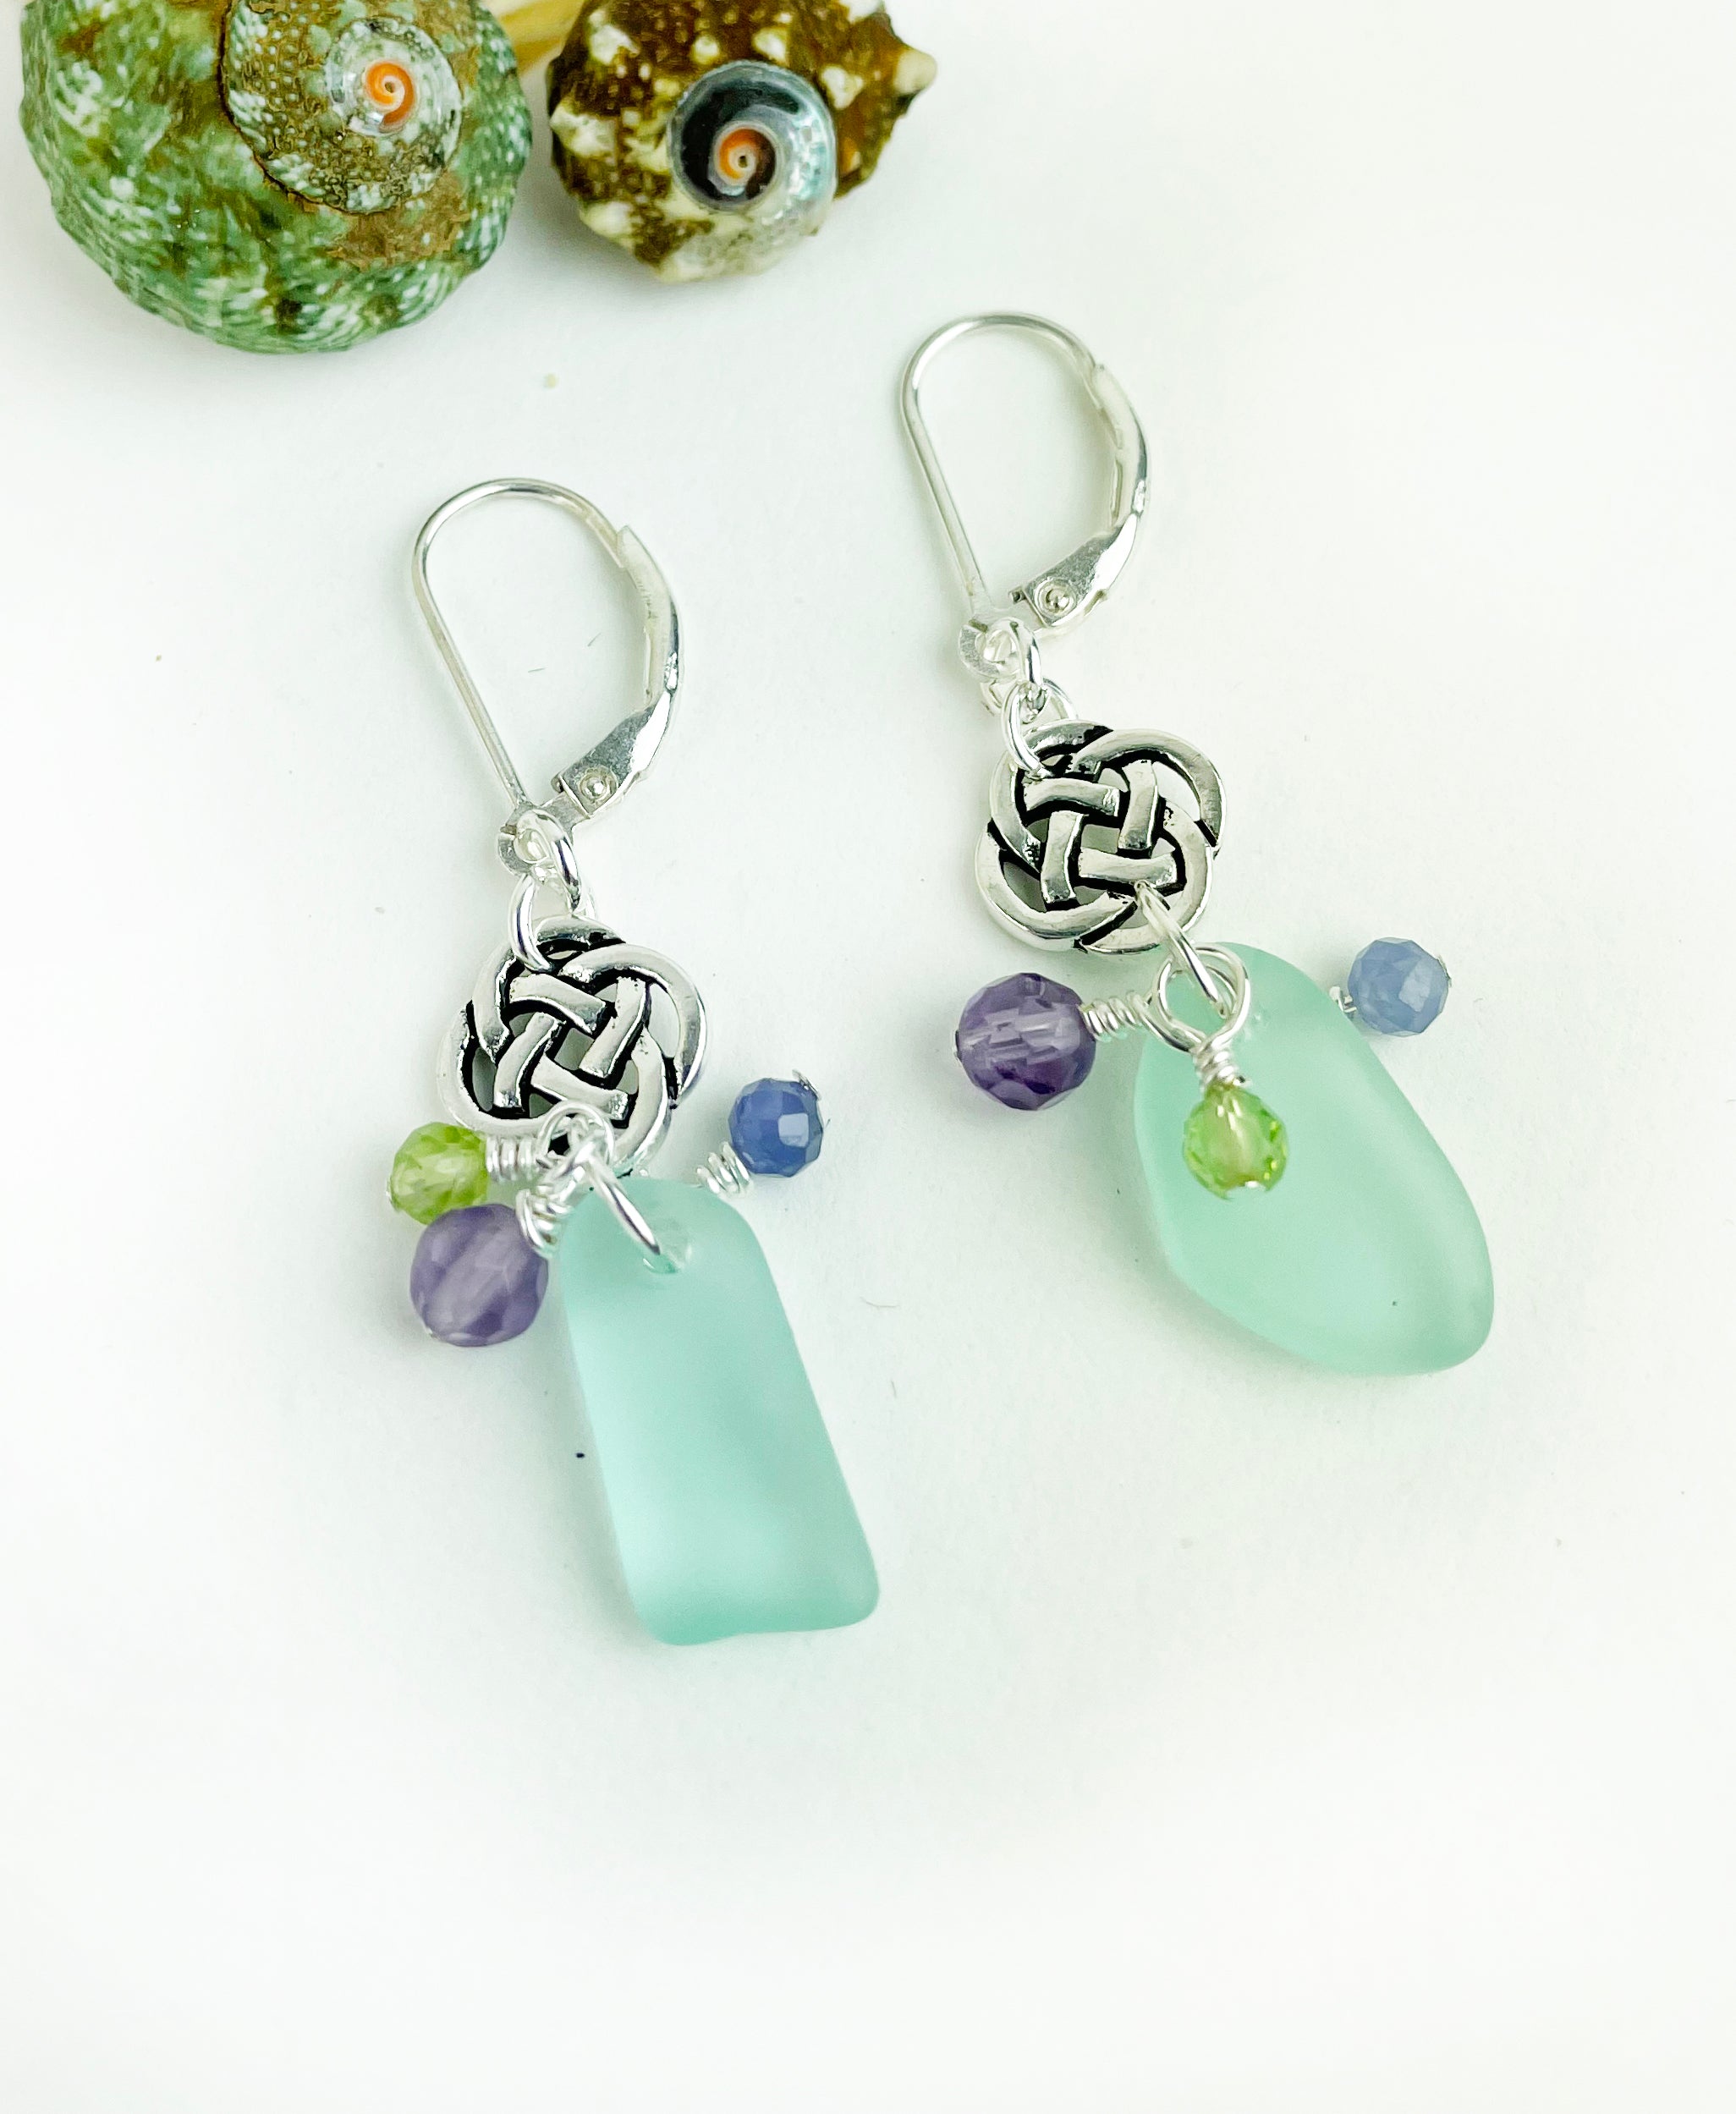 Small Round Celtic Knot with Pebble Sea Glass Earrings with Gemstones